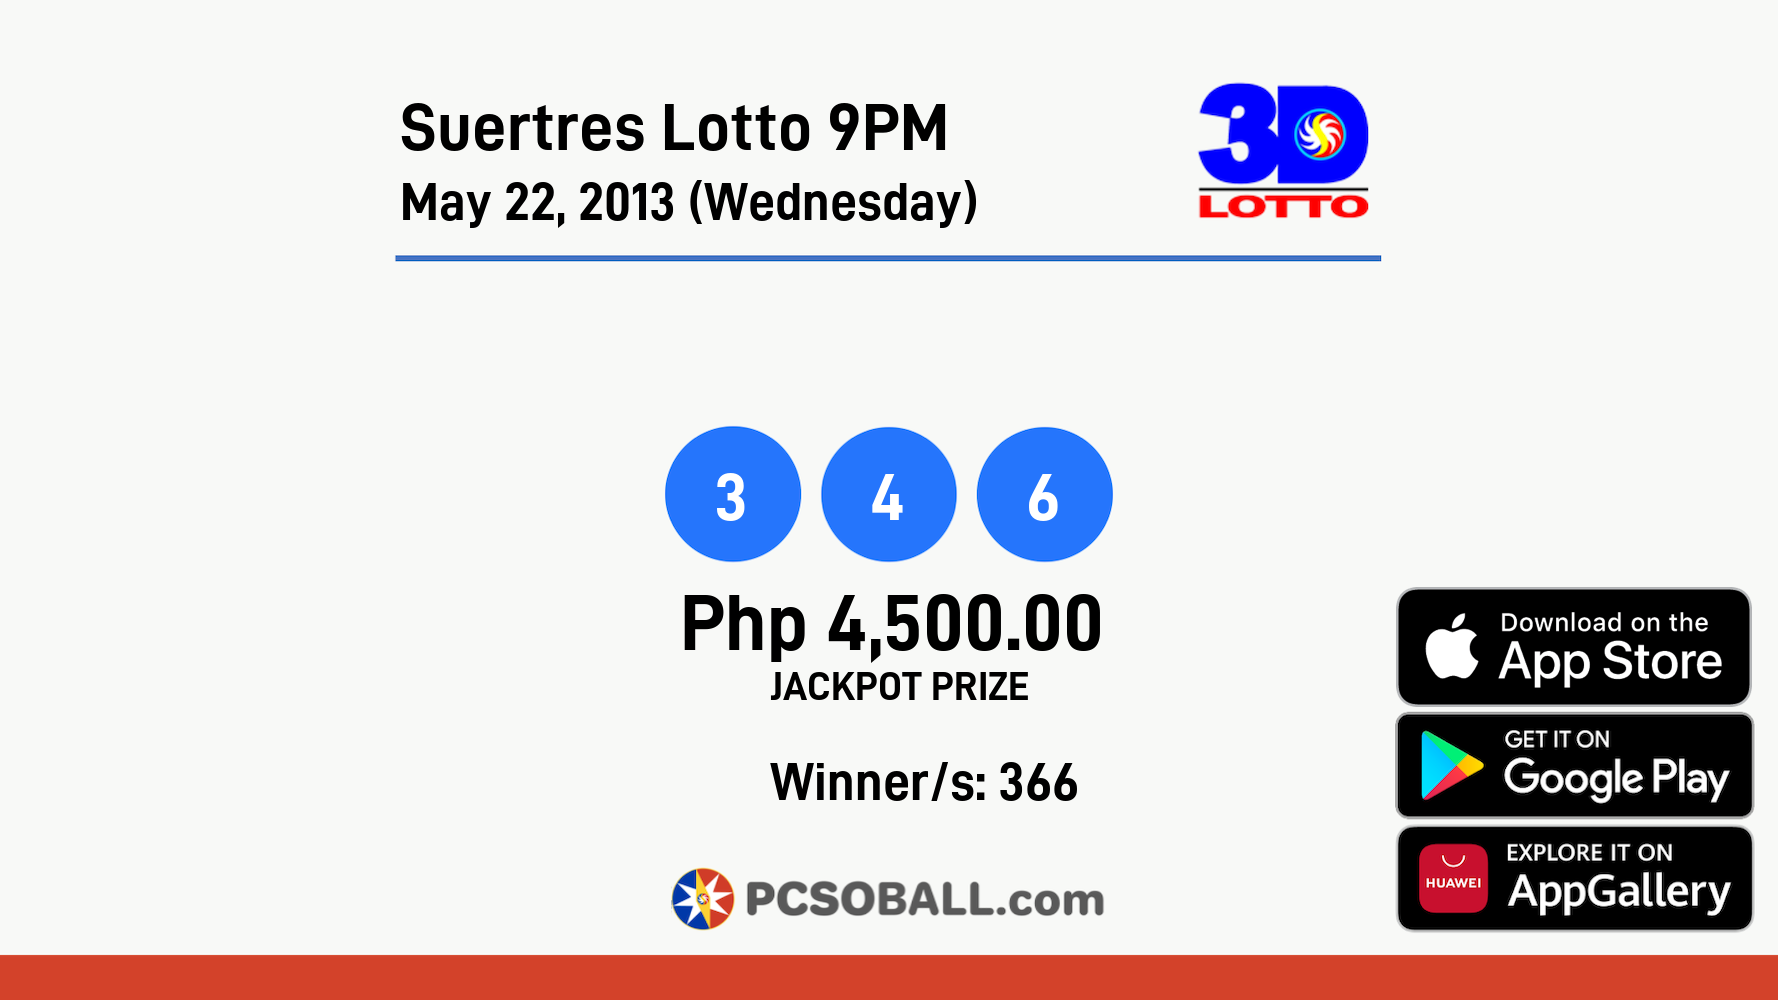 Suertres Lotto 9PM May 22, 2013 (Wednesday) Result